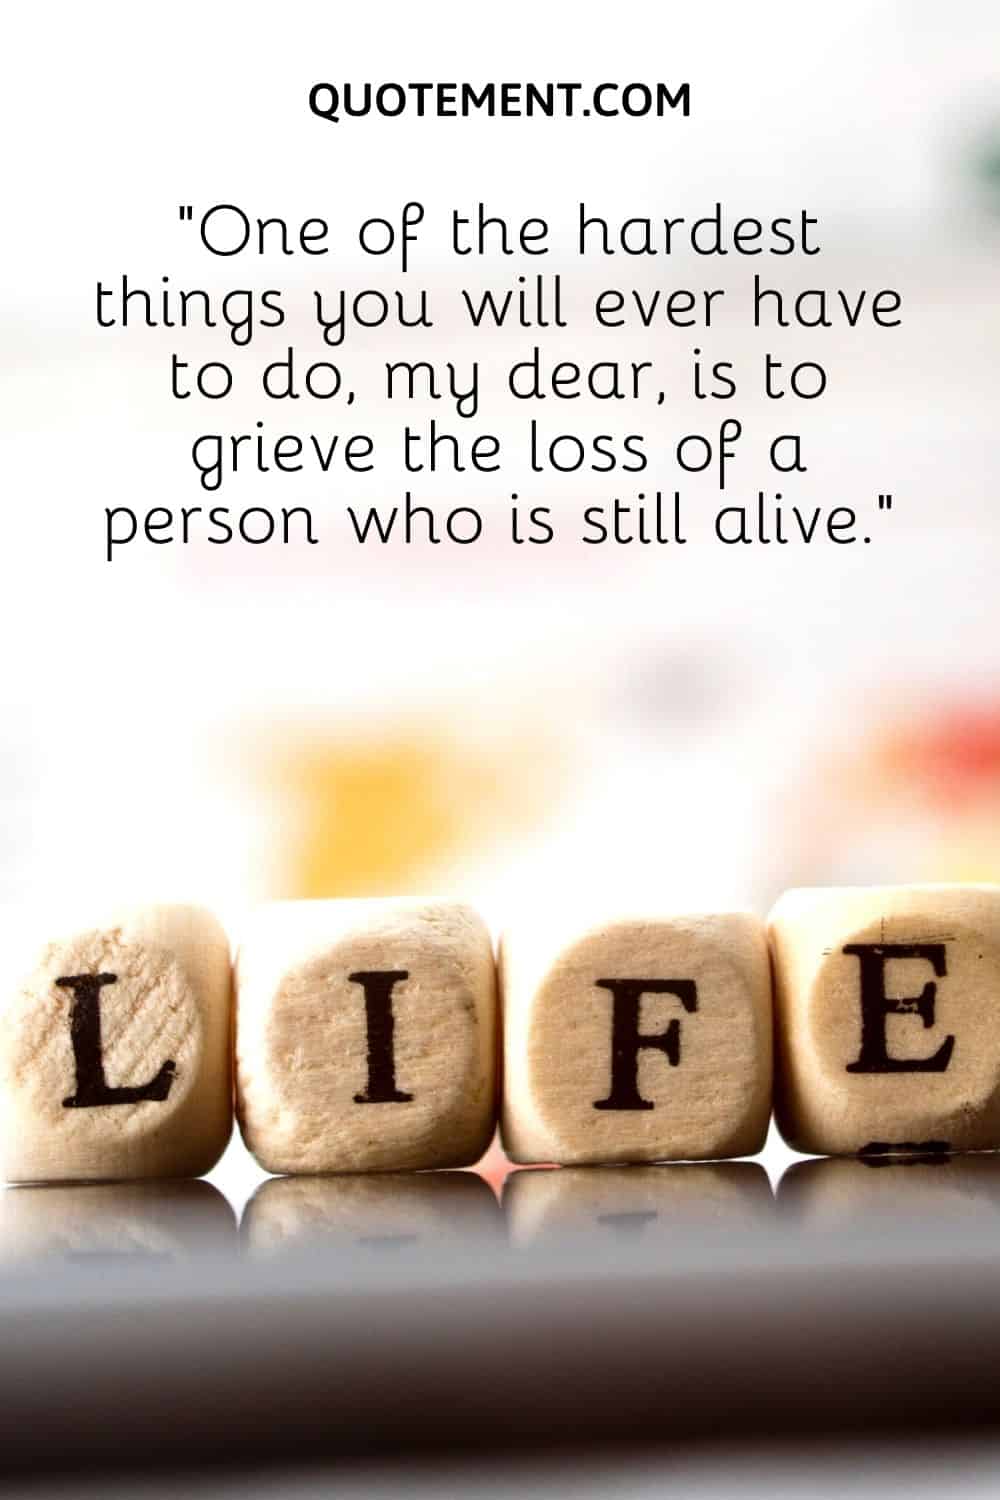 to grieve the loss of a person who is still alive